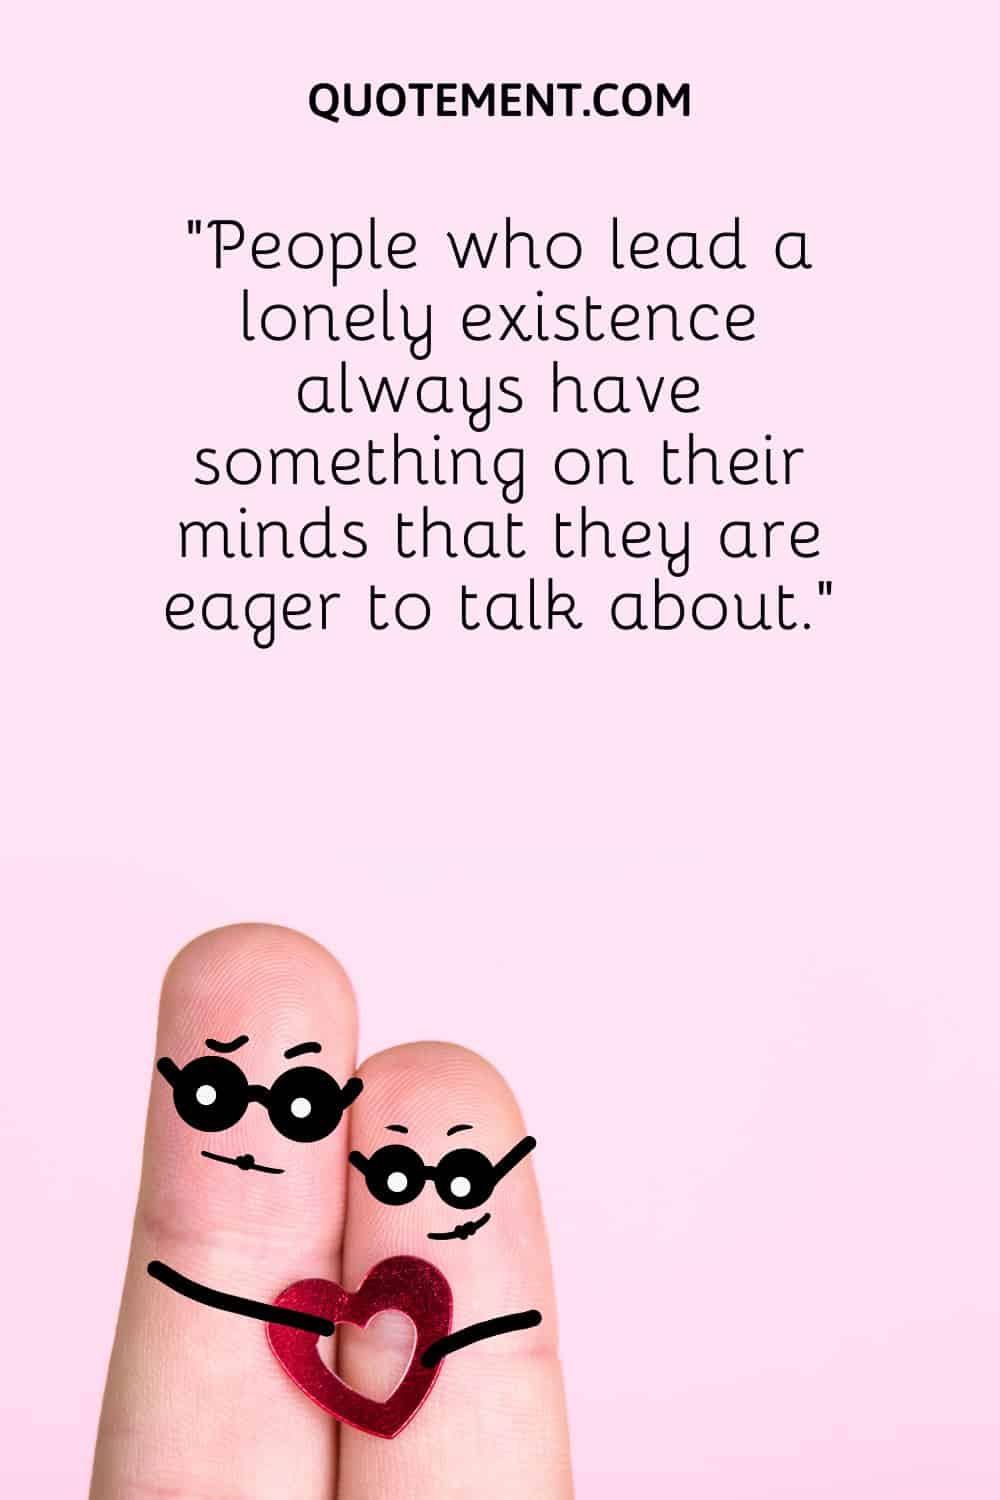 “People who lead a lonely existence always have something on their minds that they are eager to talk about.”